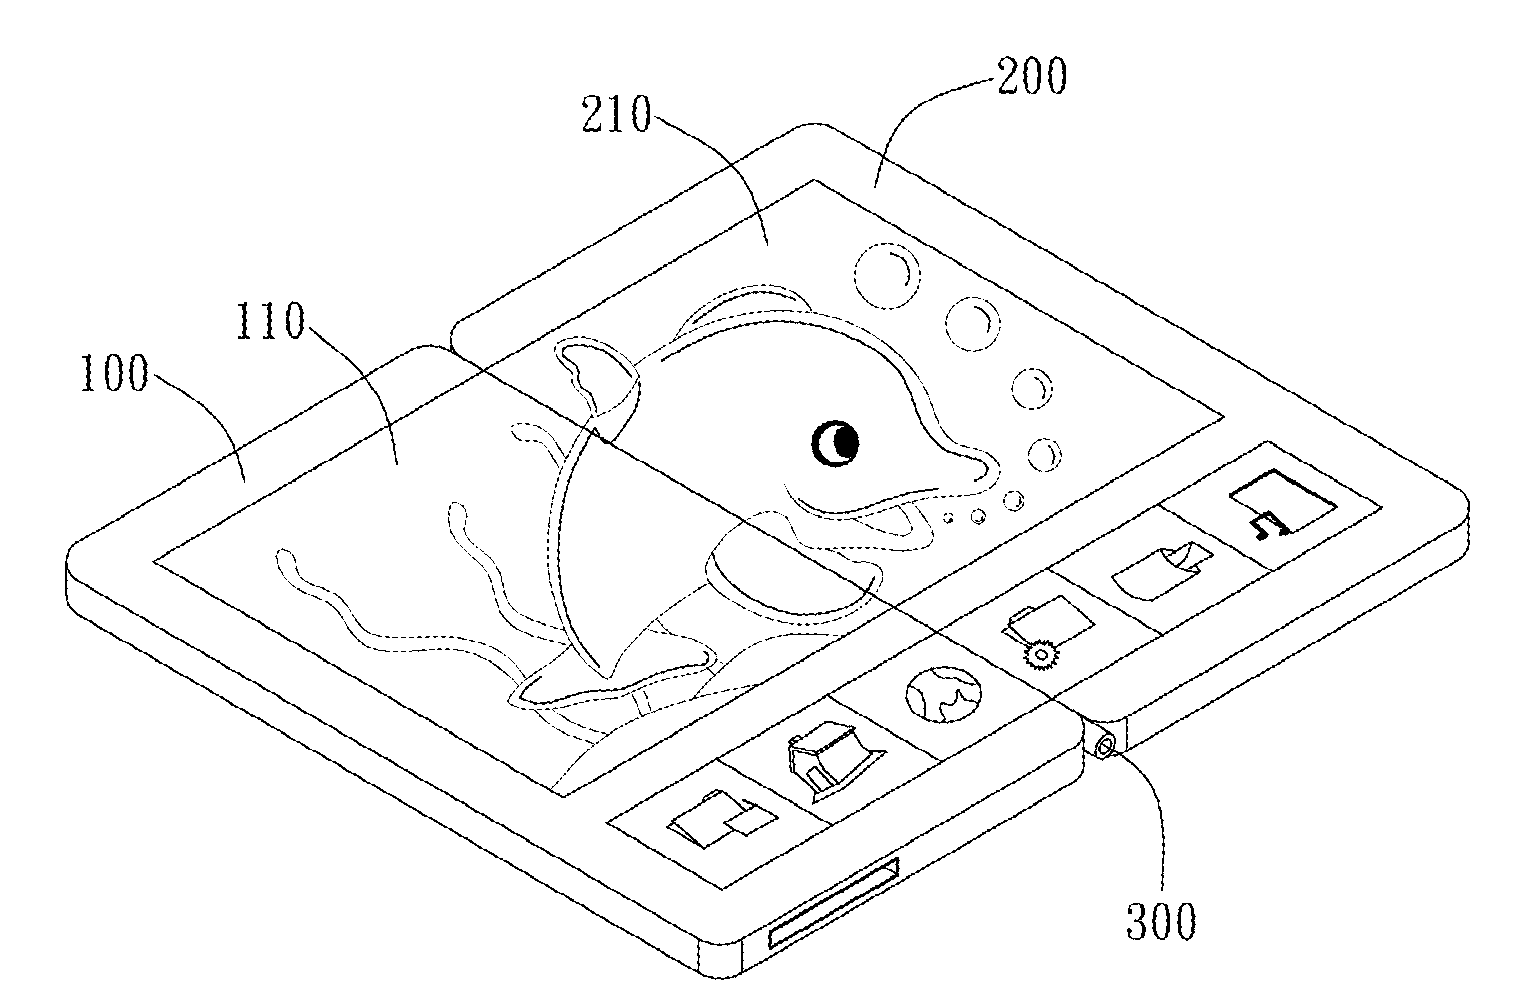 Display Device with Multiple Display Modules